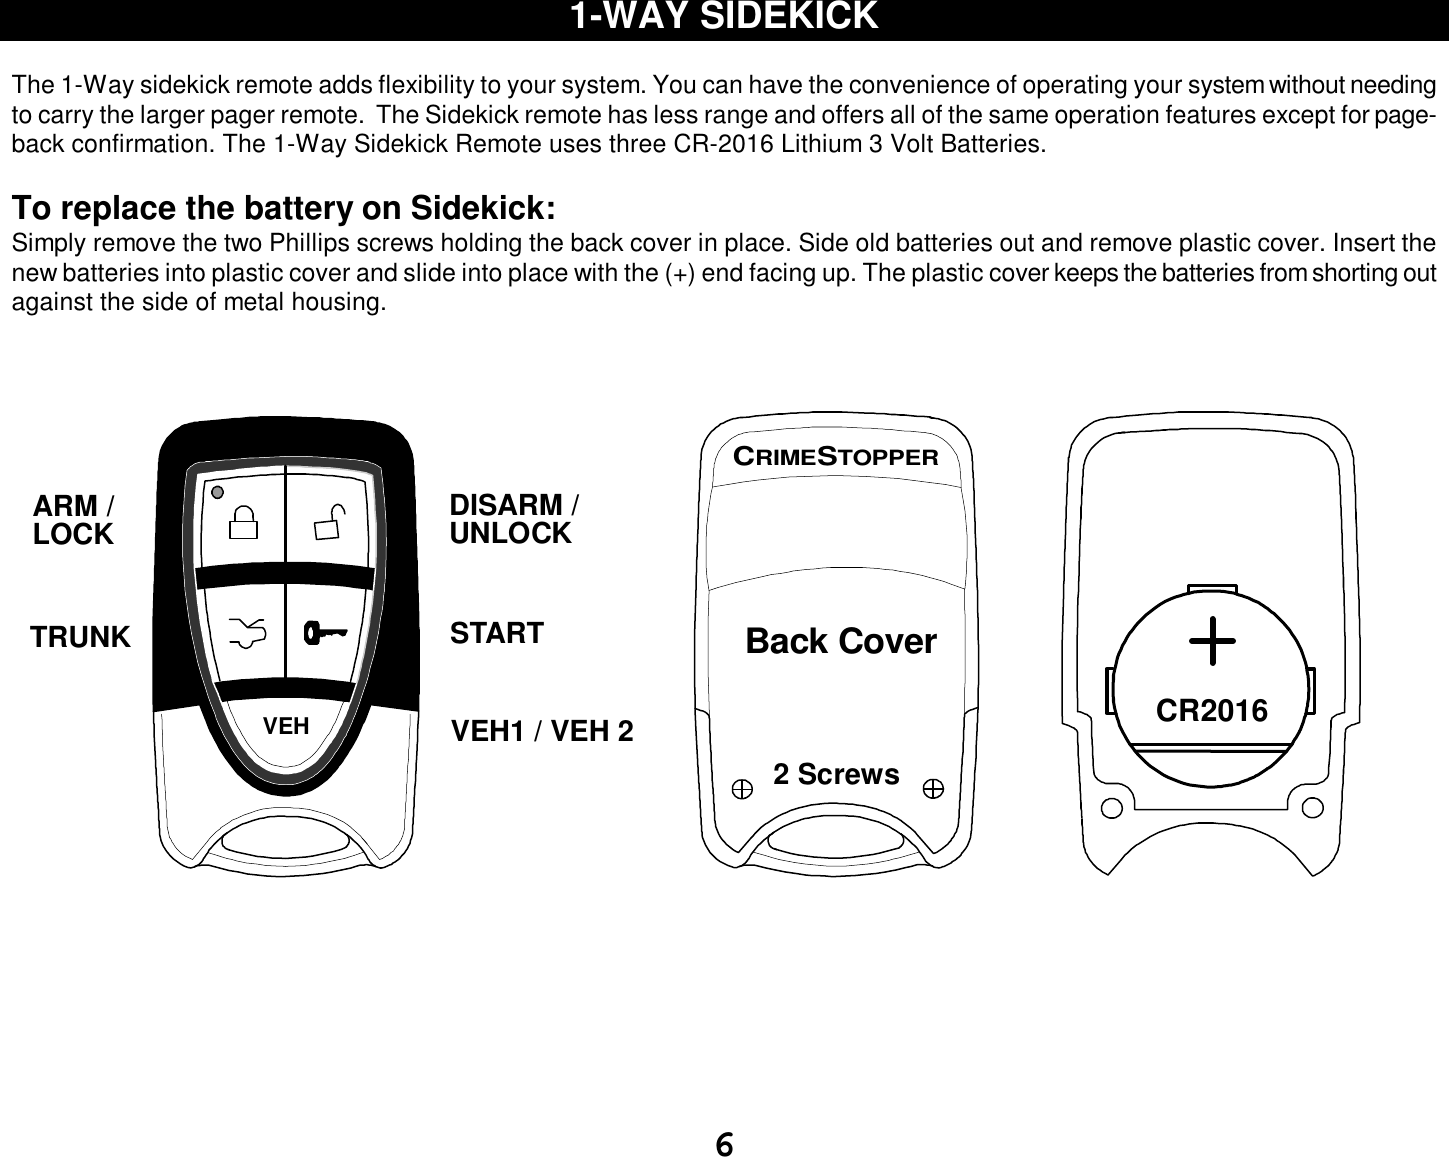  6 1-WAY SIDEKICK  The 1-Way sidekick remote adds flexibility to your system. You can have the convenience of operating your system without needing to carry the larger pager remote.  The Sidekick remote has less range and offers all of the same operation features except for page-back confirmation. The 1-Way Sidekick Remote uses three CR-2016 Lithium 3 Volt Batteries.   To replace the battery on Sidekick: Simply remove the two Phillips screws holding the back cover in place. Side old batteries out and remove plastic cover. Insert the new batteries into plastic cover and slide into place with the (+) end facing up. The plastic cover keeps the batteries from shorting out against the side of metal housing.     VEHUNLOCKSTARTDISARM /ARM /LOCKTRUNKVEH1 / VEH 2      2 ScrewsCRIMESTOPPERBack Cover          CR2016          